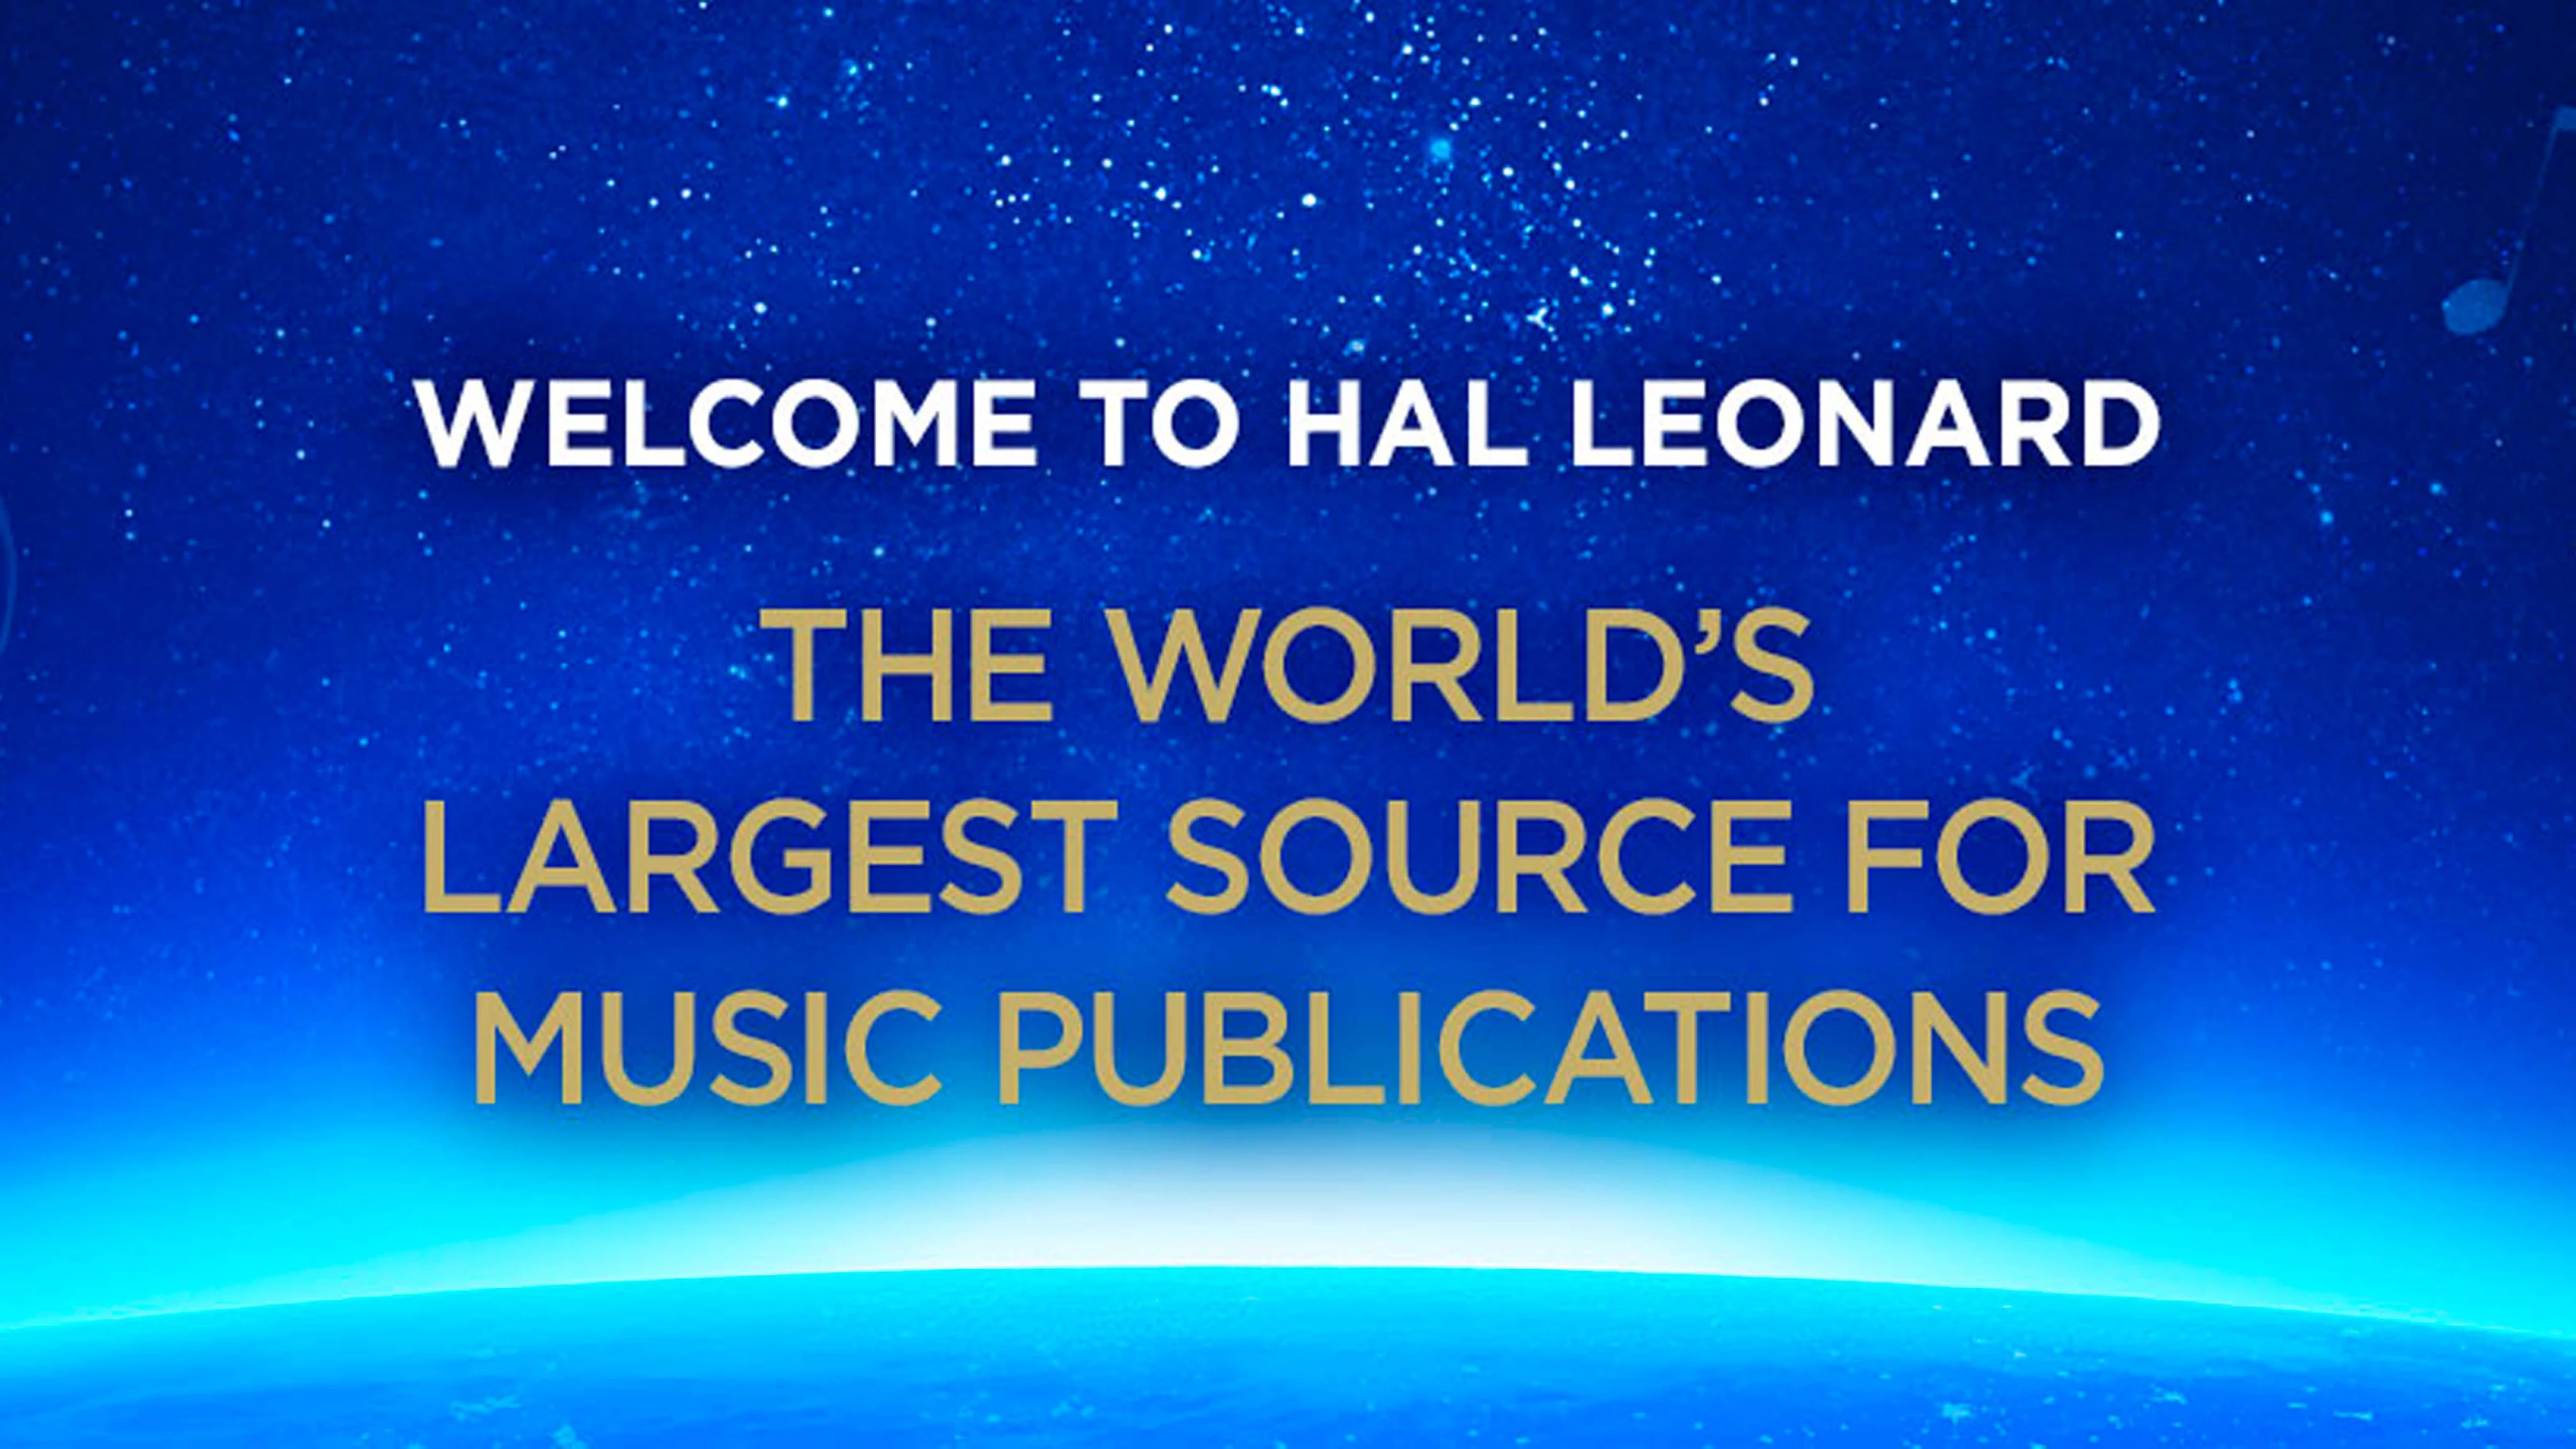 Android Apps by Hal Leonard on Google Play